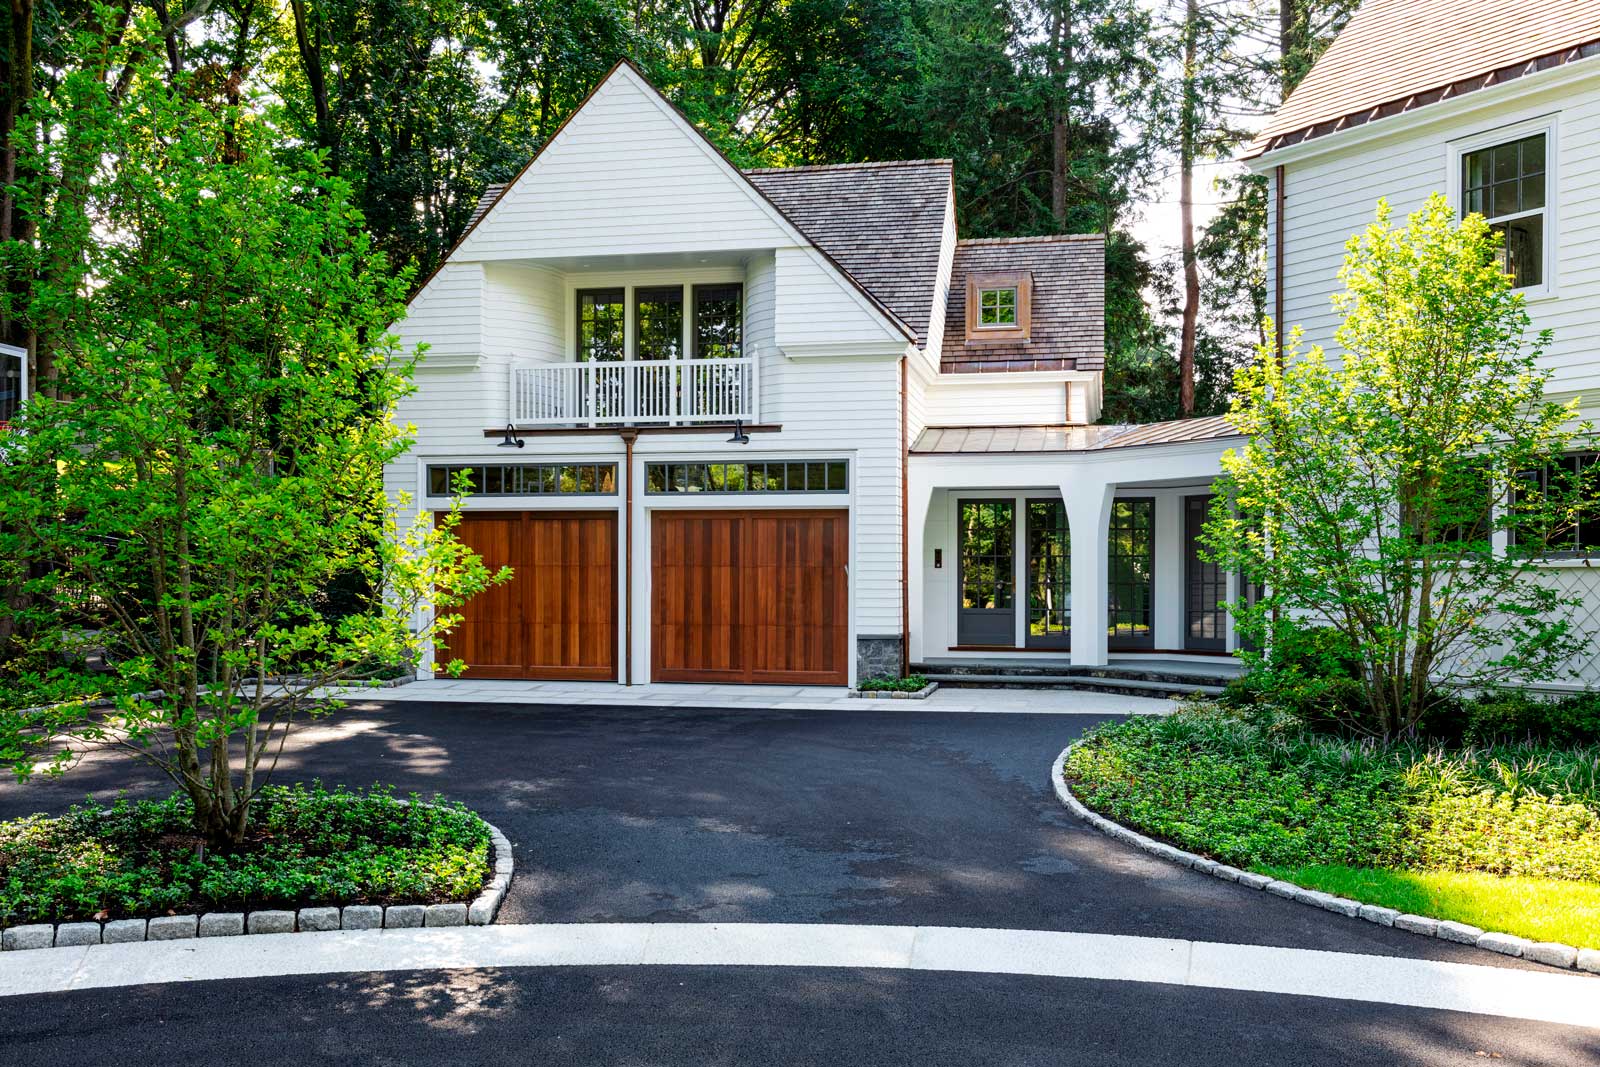 Chestnut Hill Classic Shingle Antique Home - Garage with Suite above